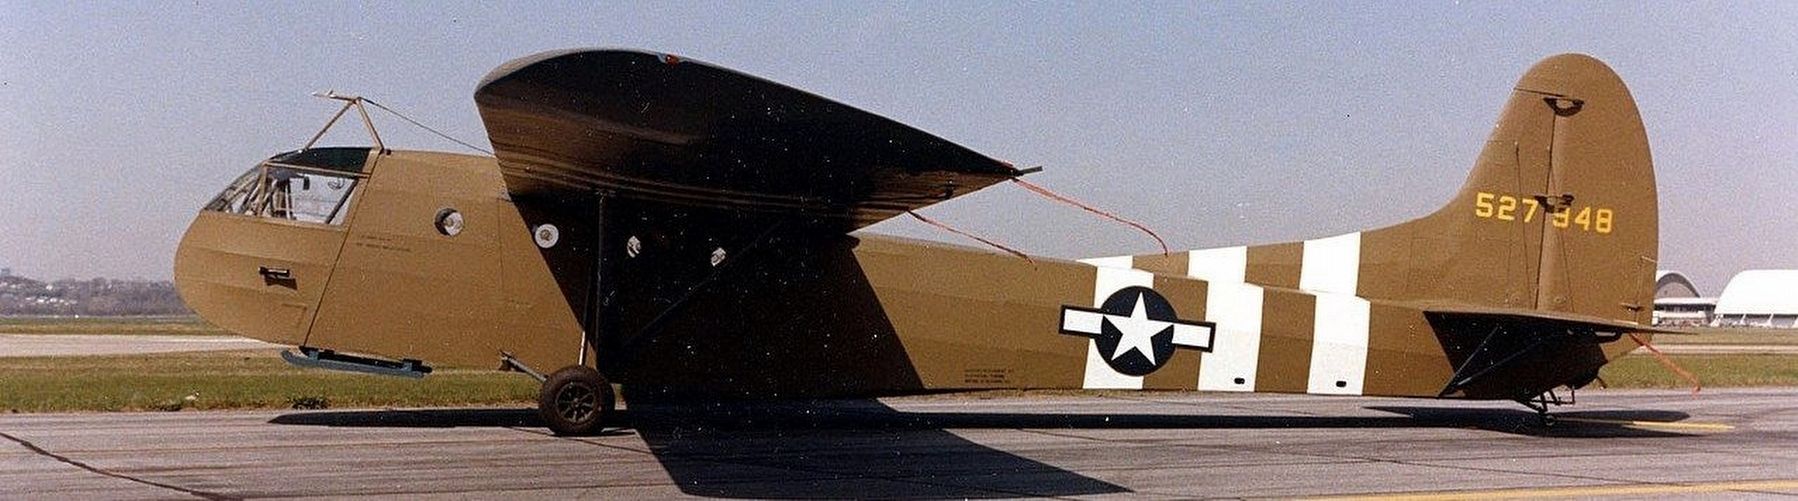 U.S. Army Air Force Waco CG-4A-GN glider (s/n 45-27948) image. Click for full size.